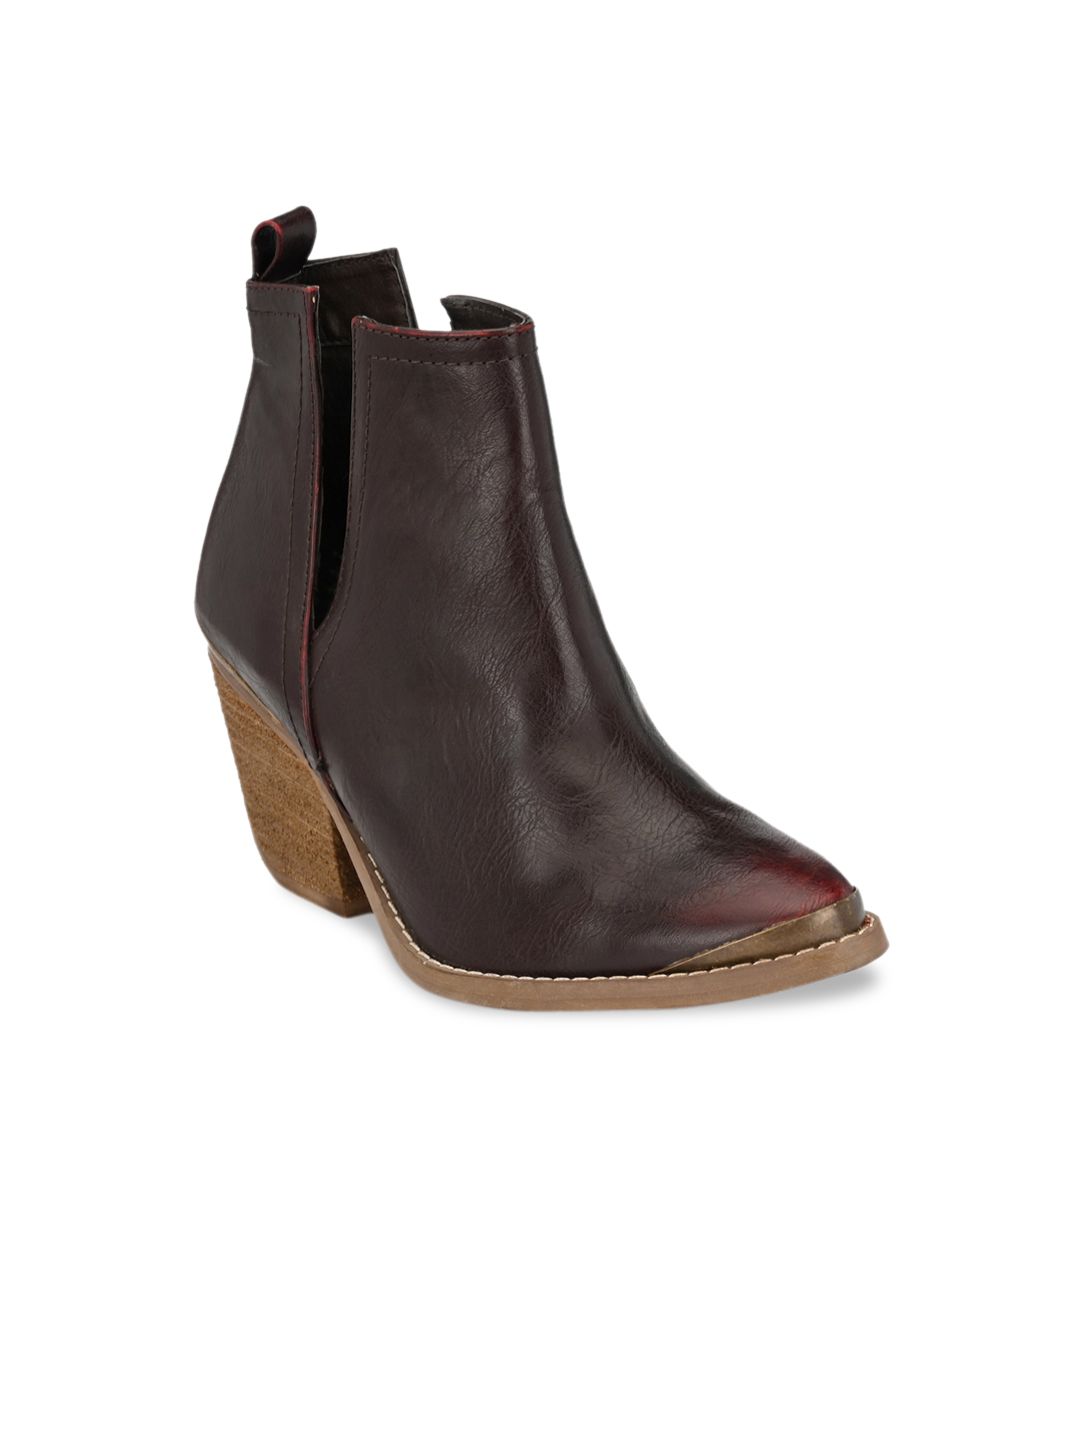 Zebba Women Maroon & Brown Textured Heeled Boots Price in India